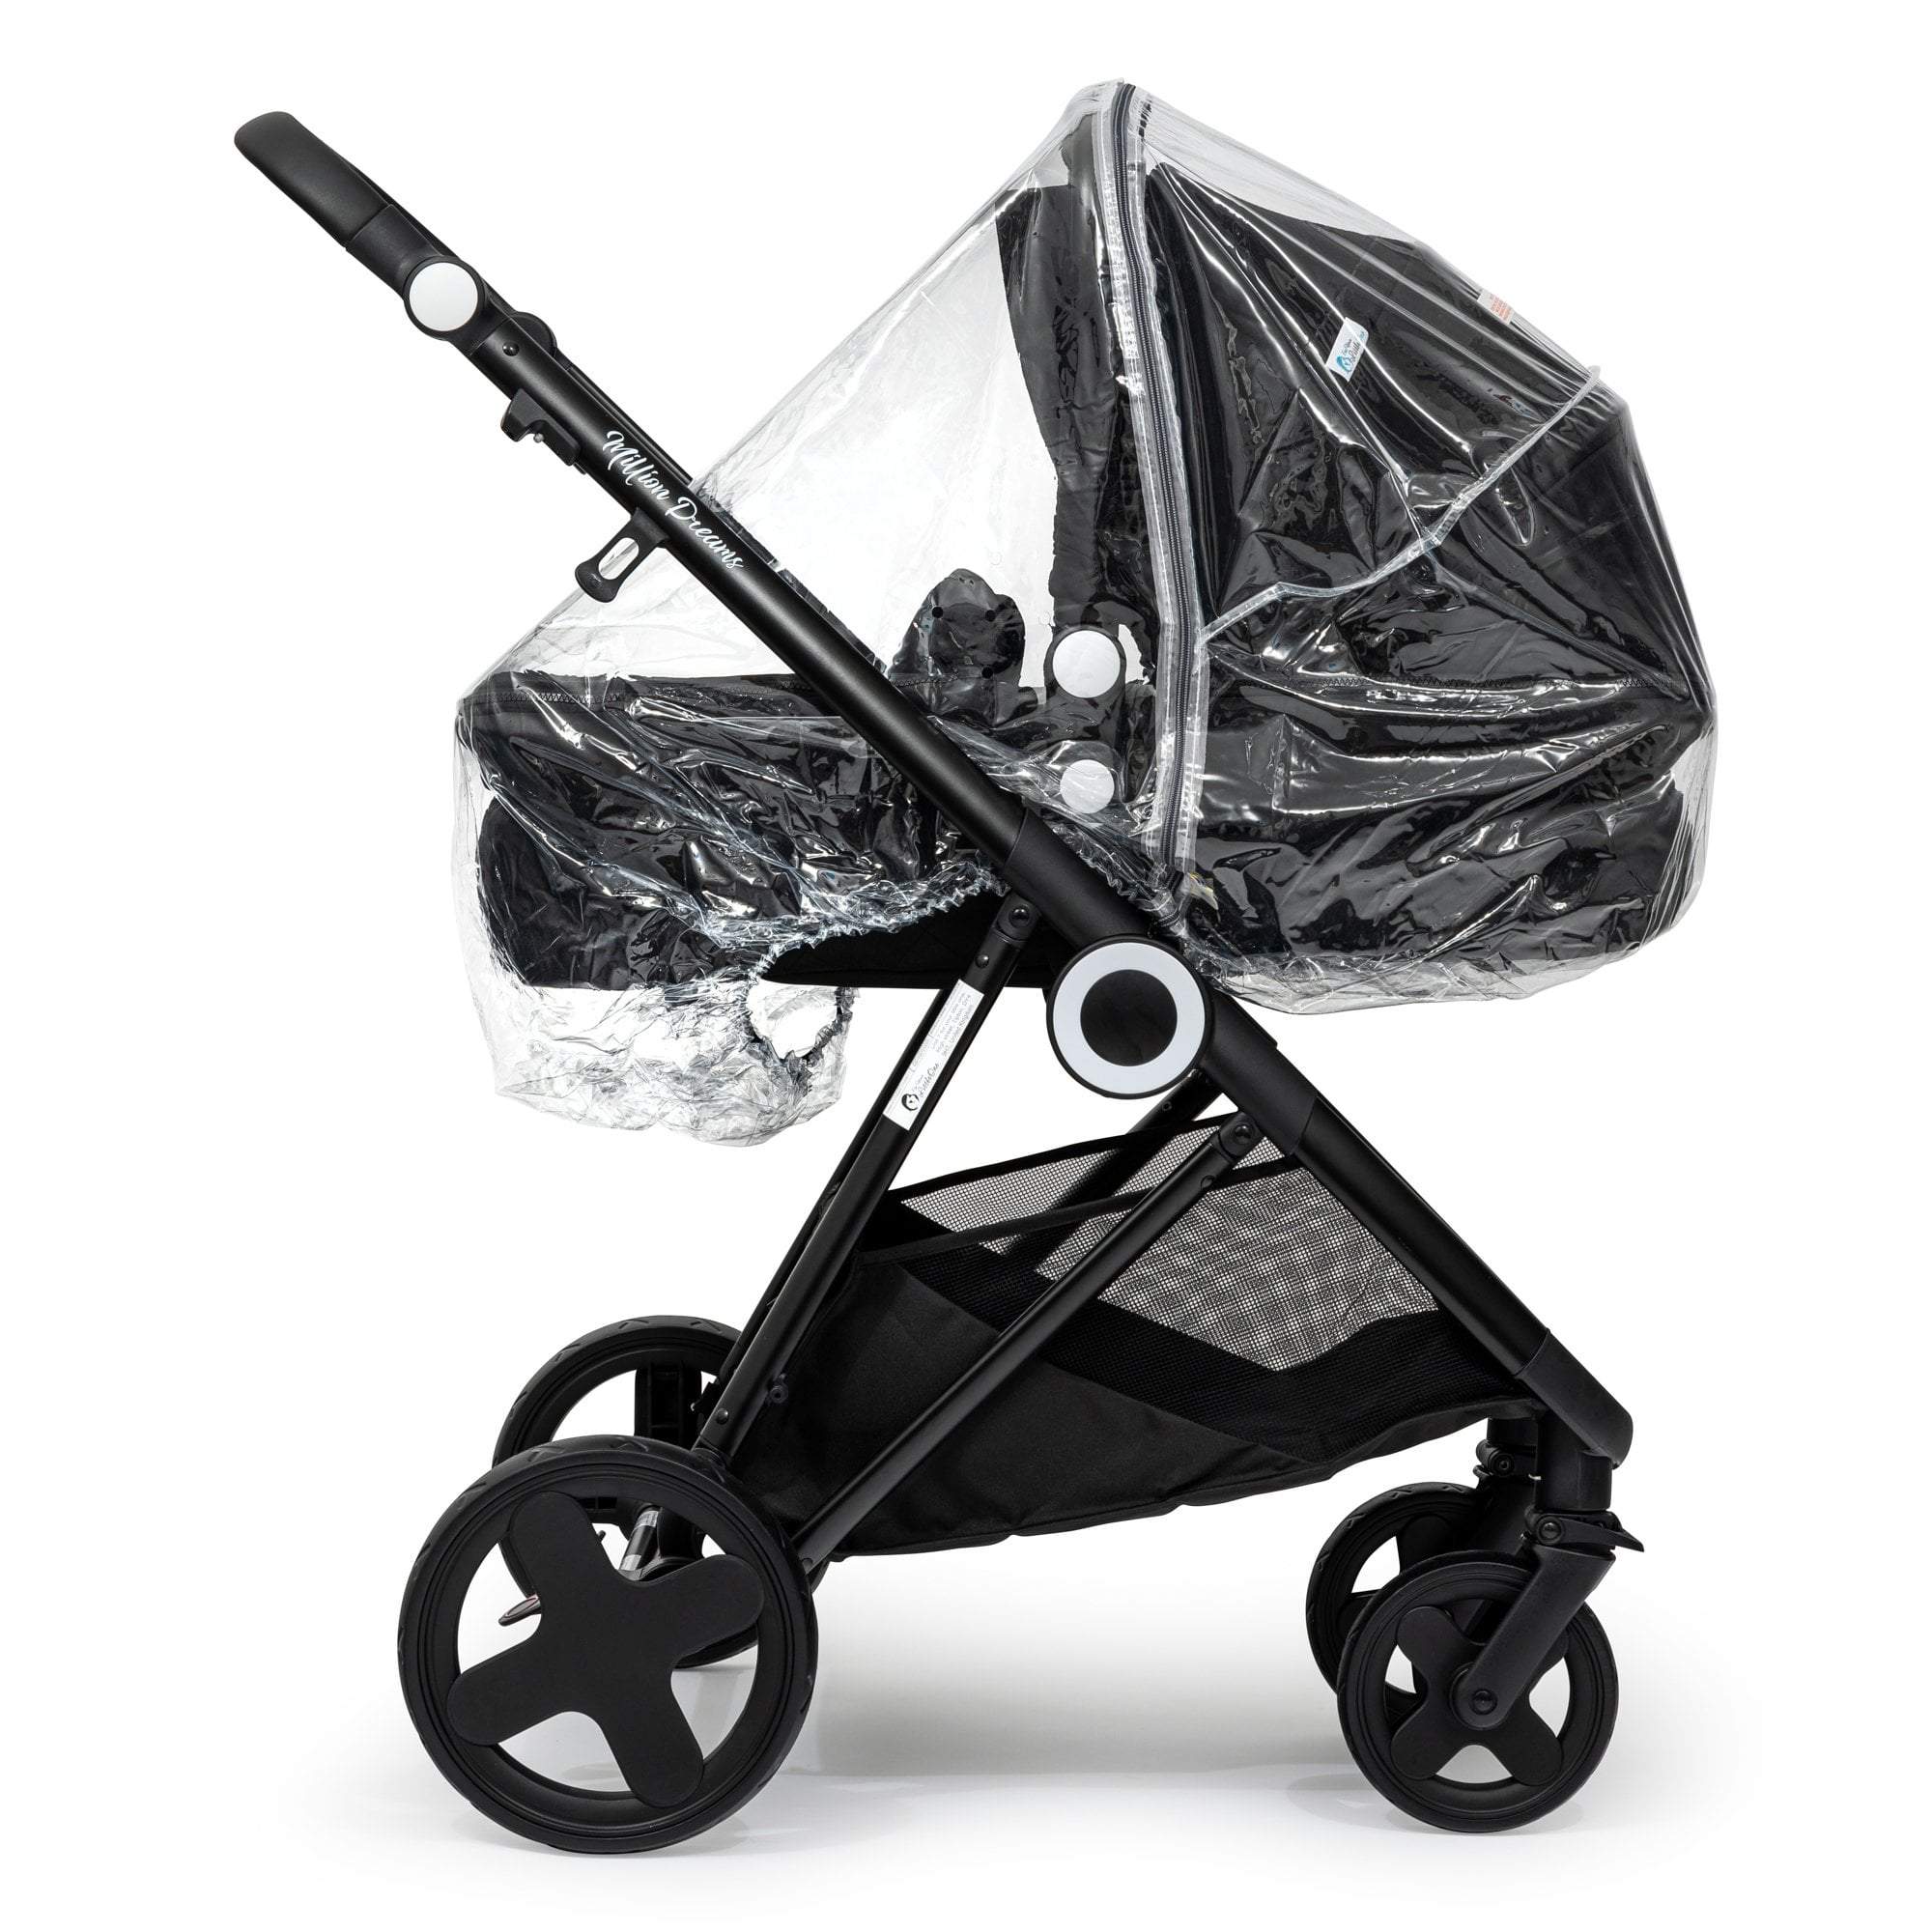 Carrycot Raincover Compatible With Orbit Baby - Fits All Models - For Your Little One